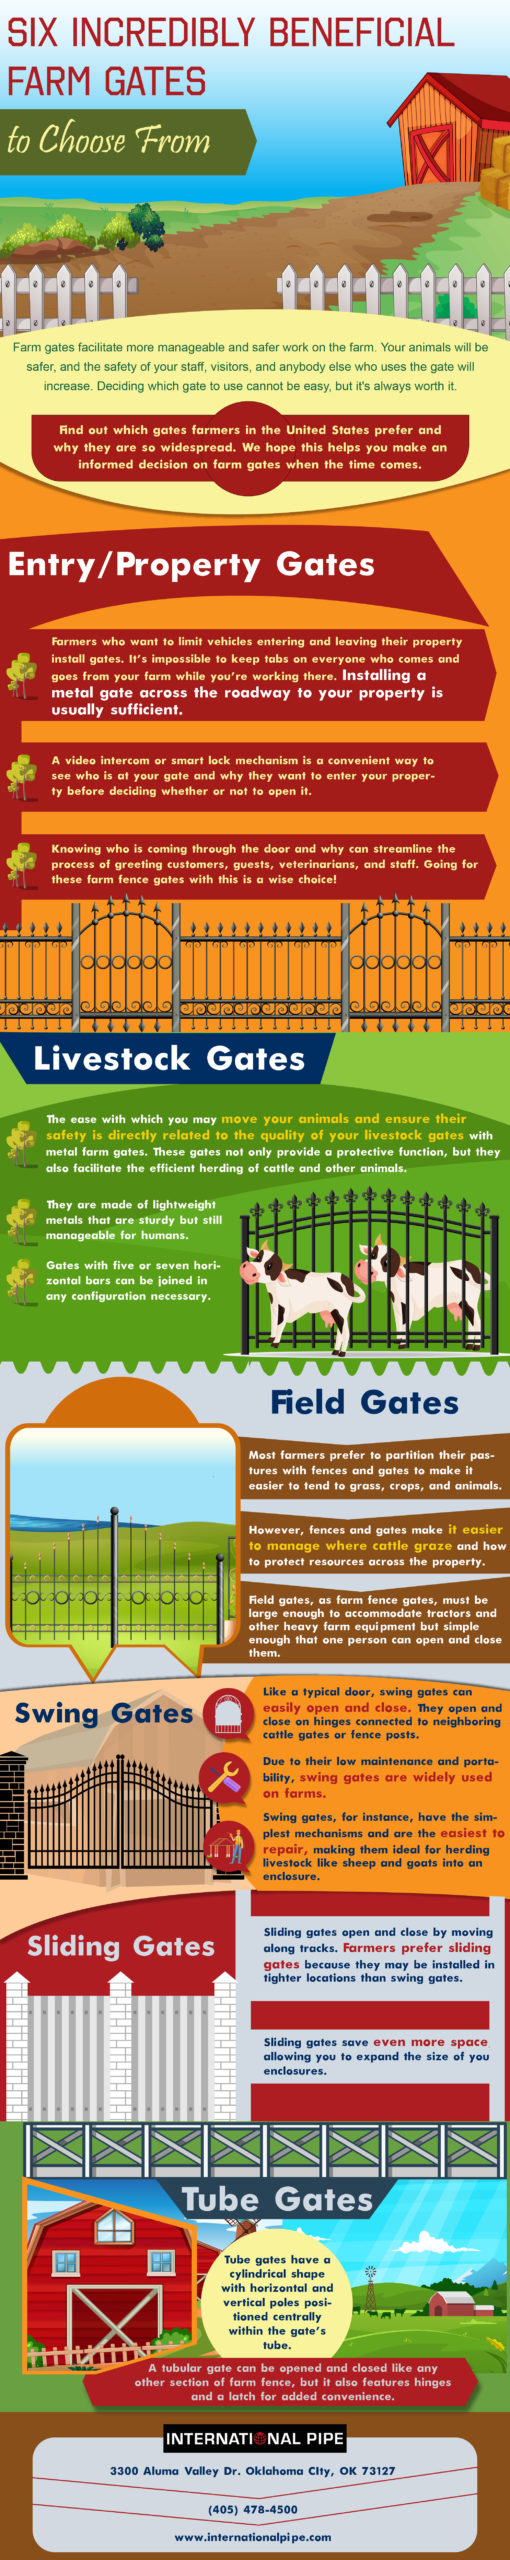 Six Incredibly Beneficial Farm Gates To choose